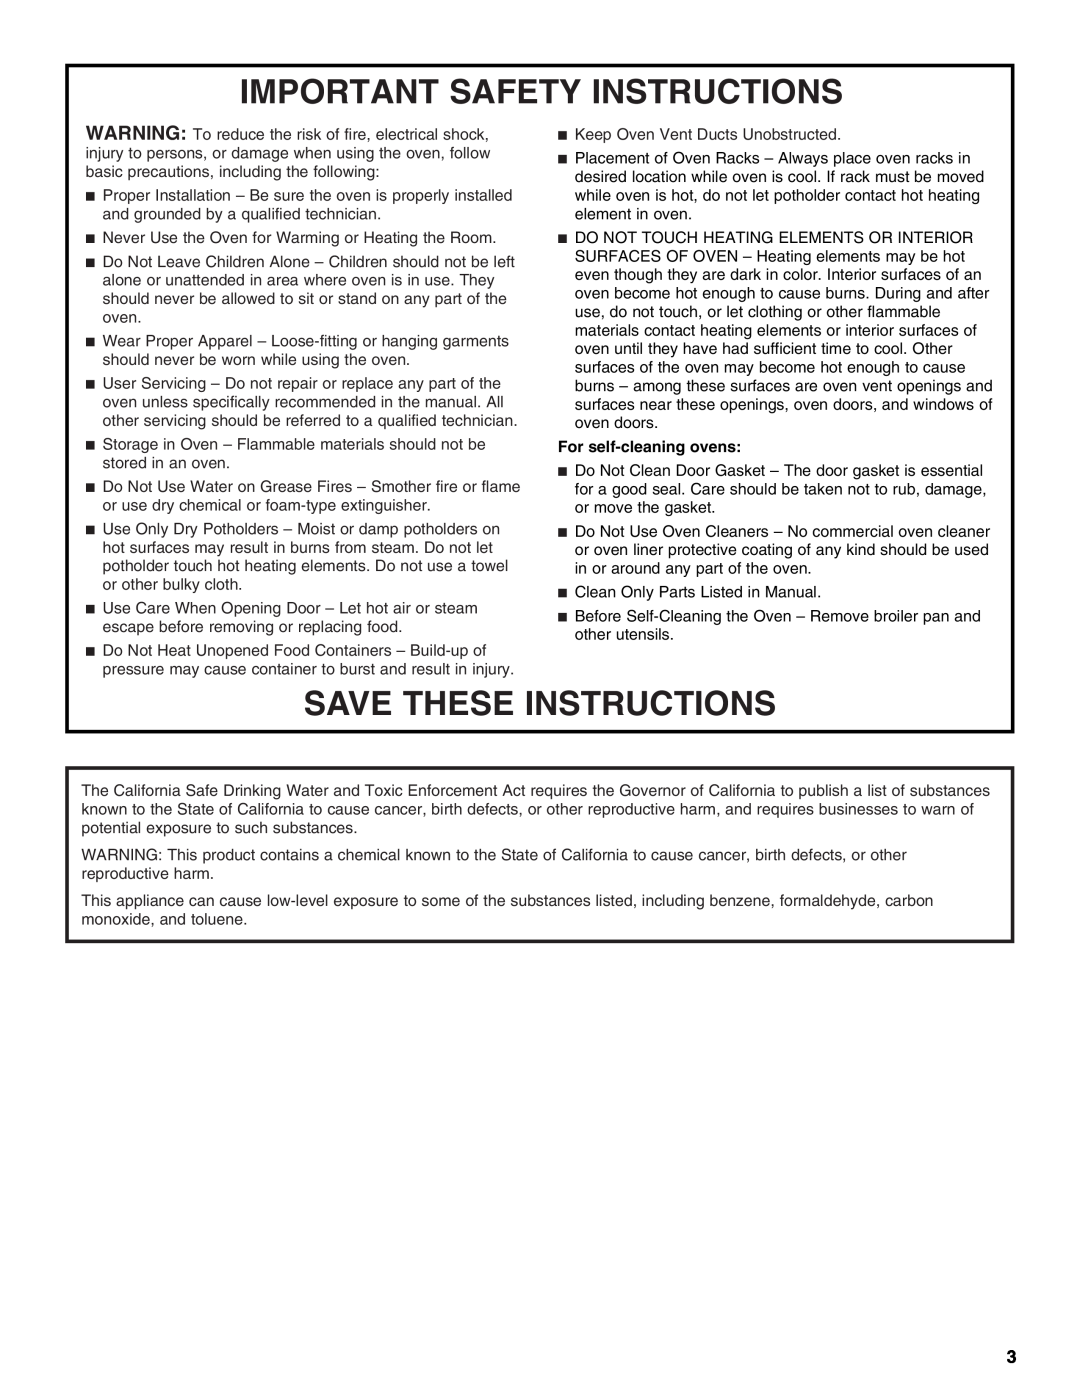 Whirlpool RBS307, RBS277, RBD307, RBD277 Important Safety Instructions, Save These Instructions, For self-cleaning ovens 